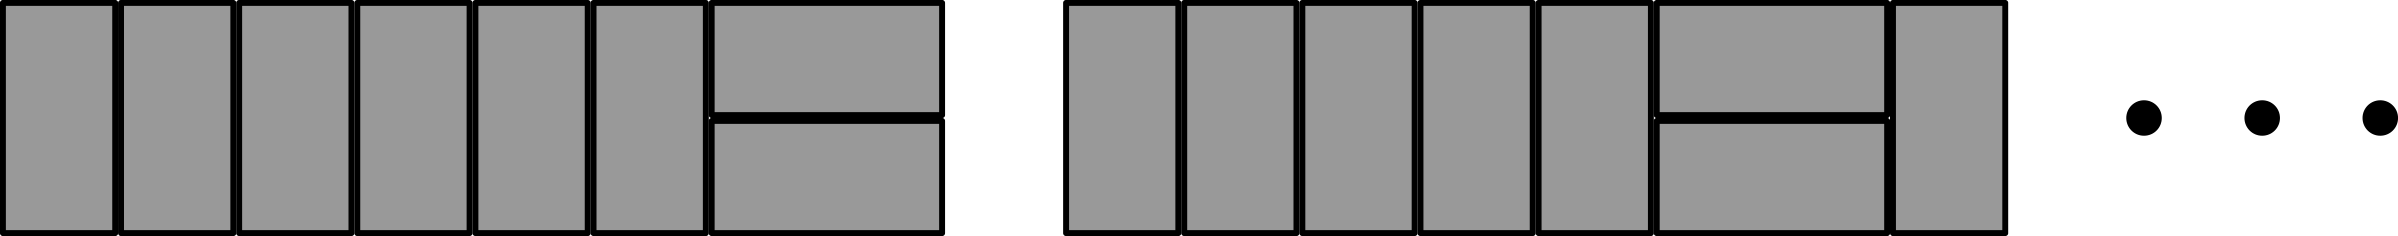 One possible arrangement has six vertical rectangles side by side followed by one pair of horizontal rectangles. Another possible arrangement has five vertical rectangles side by side followed by a pair of horizontal rectangles and then one more vertical rectangle.